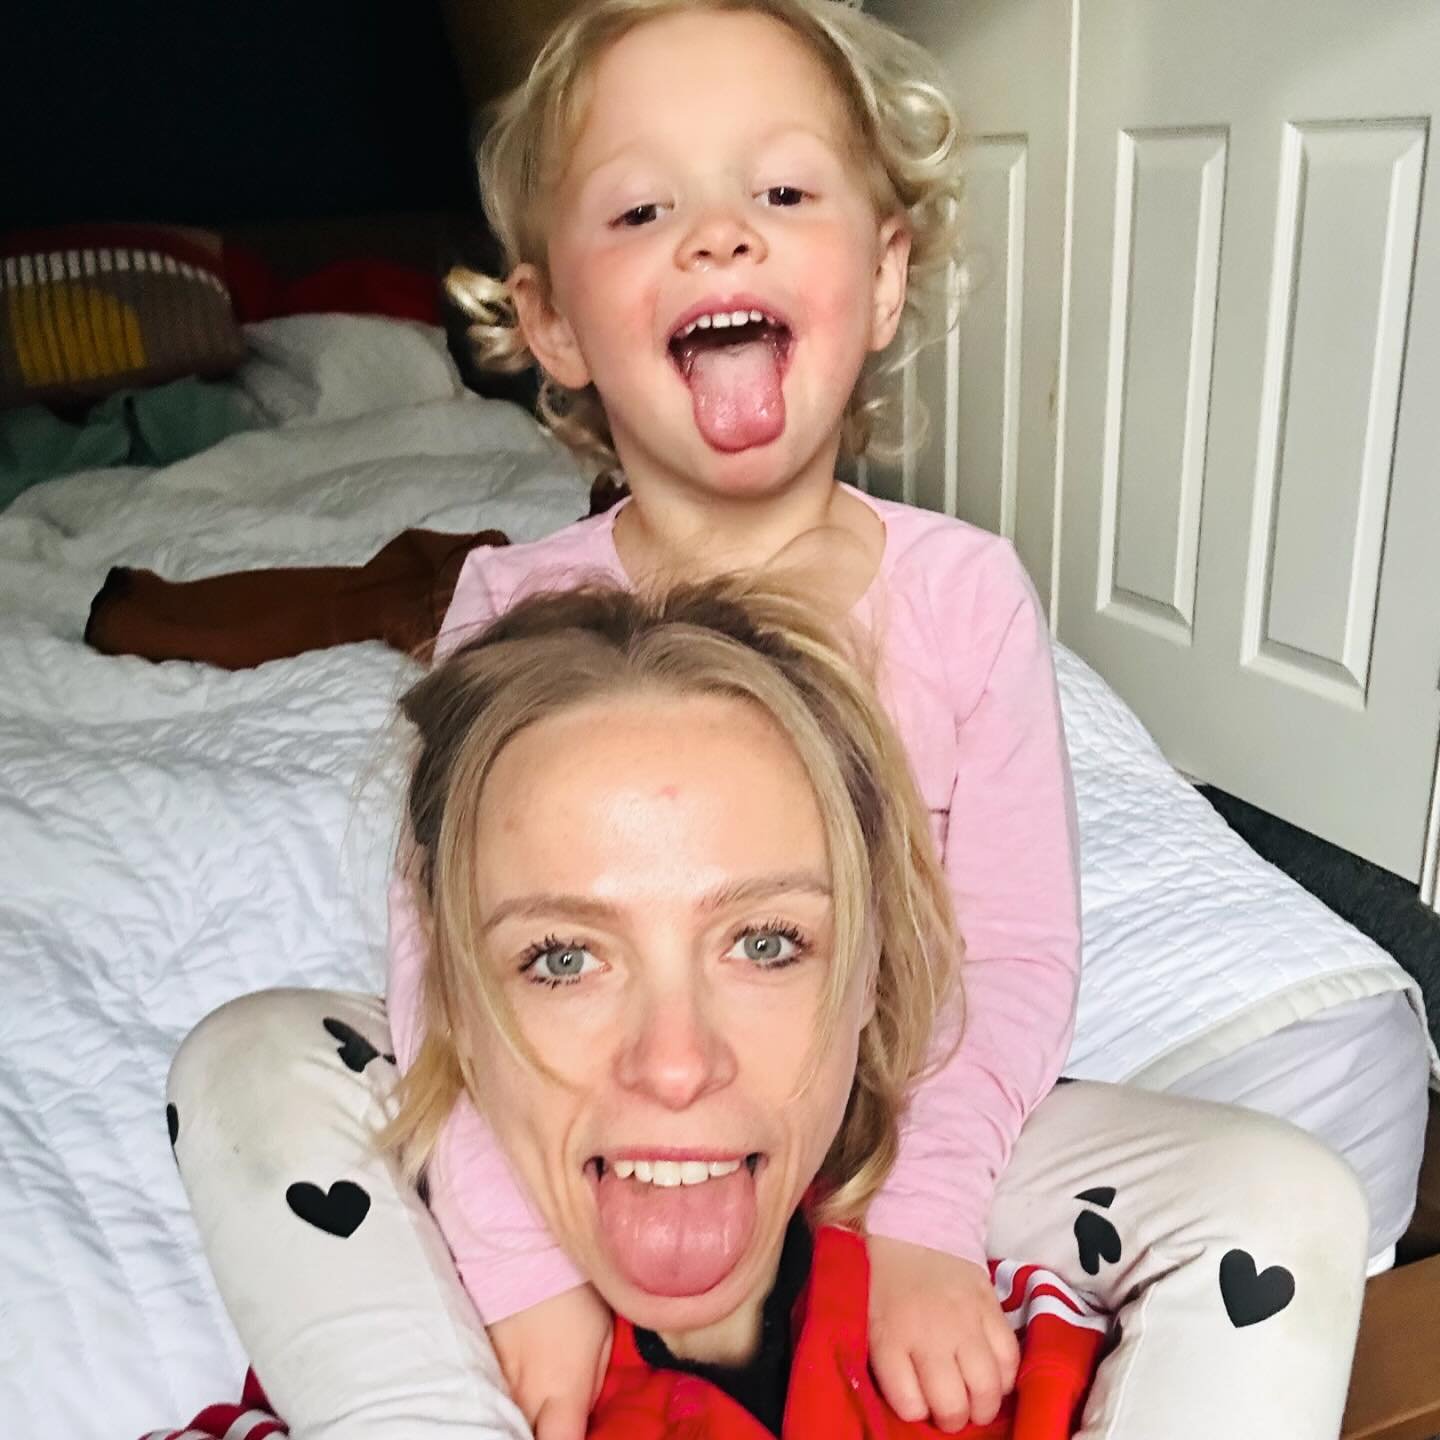 Parenting is a TRIP.

&lsquo;It takes a village&rsquo; but there is no village for most of us. 

We are all on our tiny, isolated  islands juggling a thousand balls. 

It is, without a doubt, the hardest thing I have ever done. 

And yes, it is also 